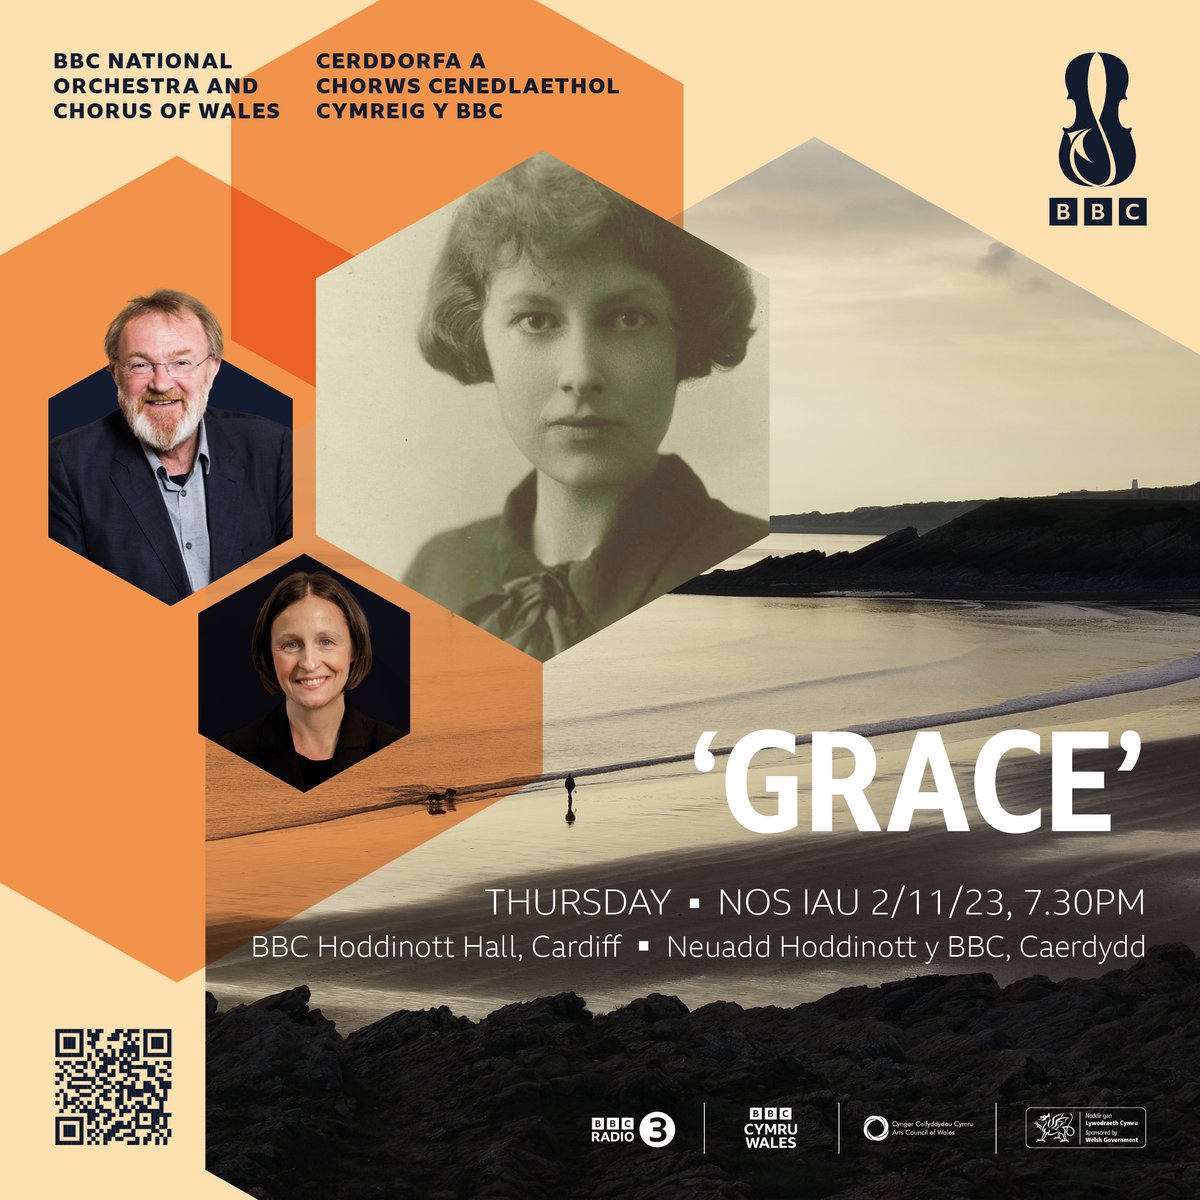 Discover the musical magic of ‘Grace’✨ Experience #WorldPremieres by @sarah_lianne_l, Kaija Saariaho's #UKPremiere, and the timeless elegance of Grace Williams' Second Symphony 🗓Nov 2, 7:30 PM at BBC Hoddinott Hall 🎟 Tickets from £5 bbc.co.uk/events/e932rz